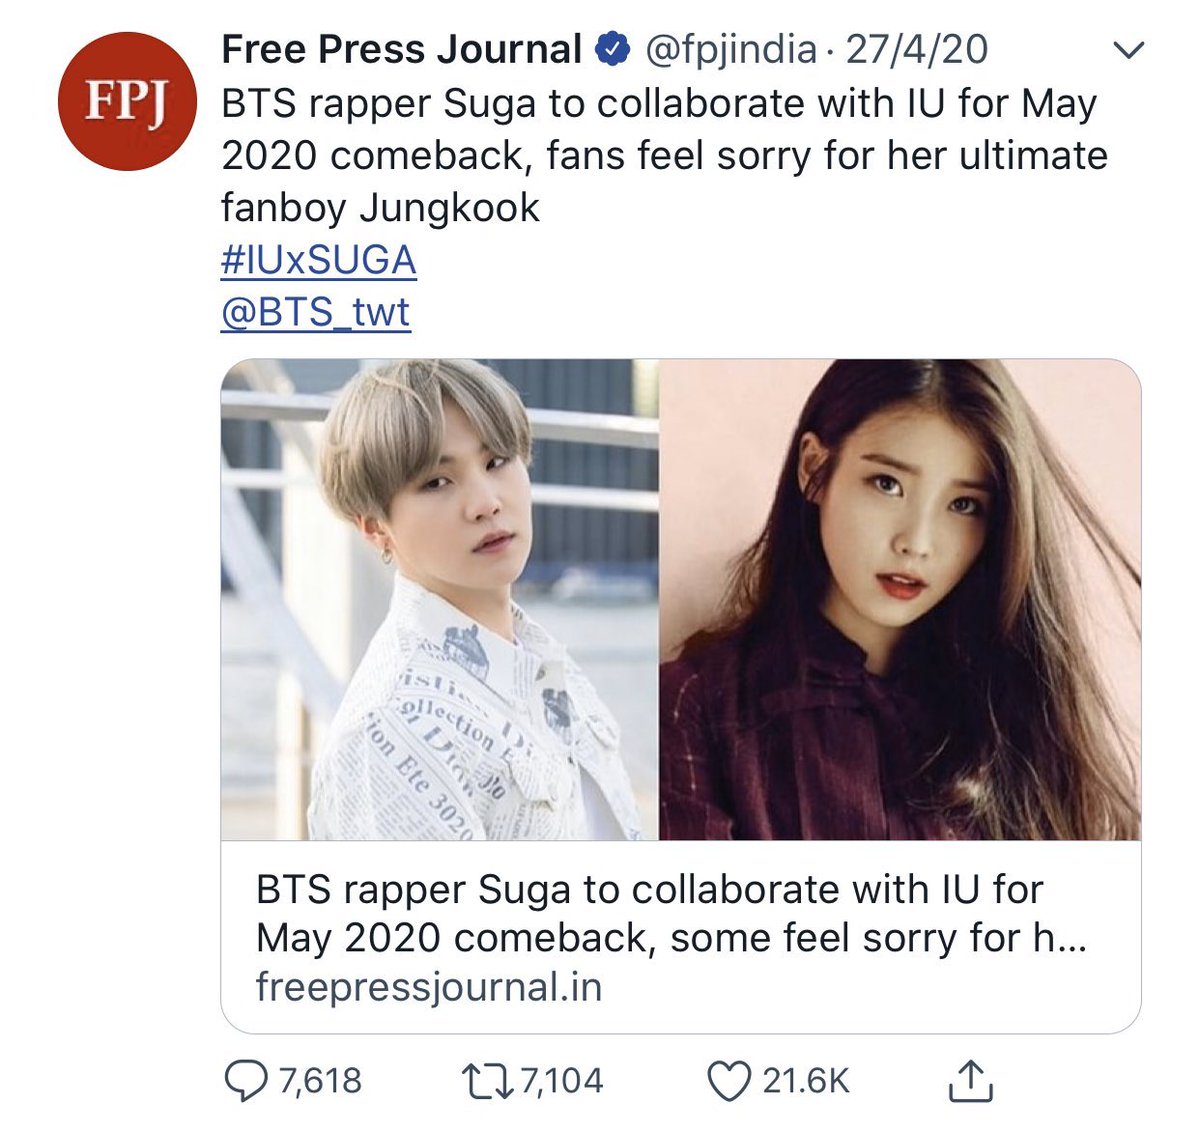 this is absolutely ridiculous. look at the likes on the article. you all are obsessed with making him the butt of your jokes. really? a collab happens and your first thought is to make fun of him?